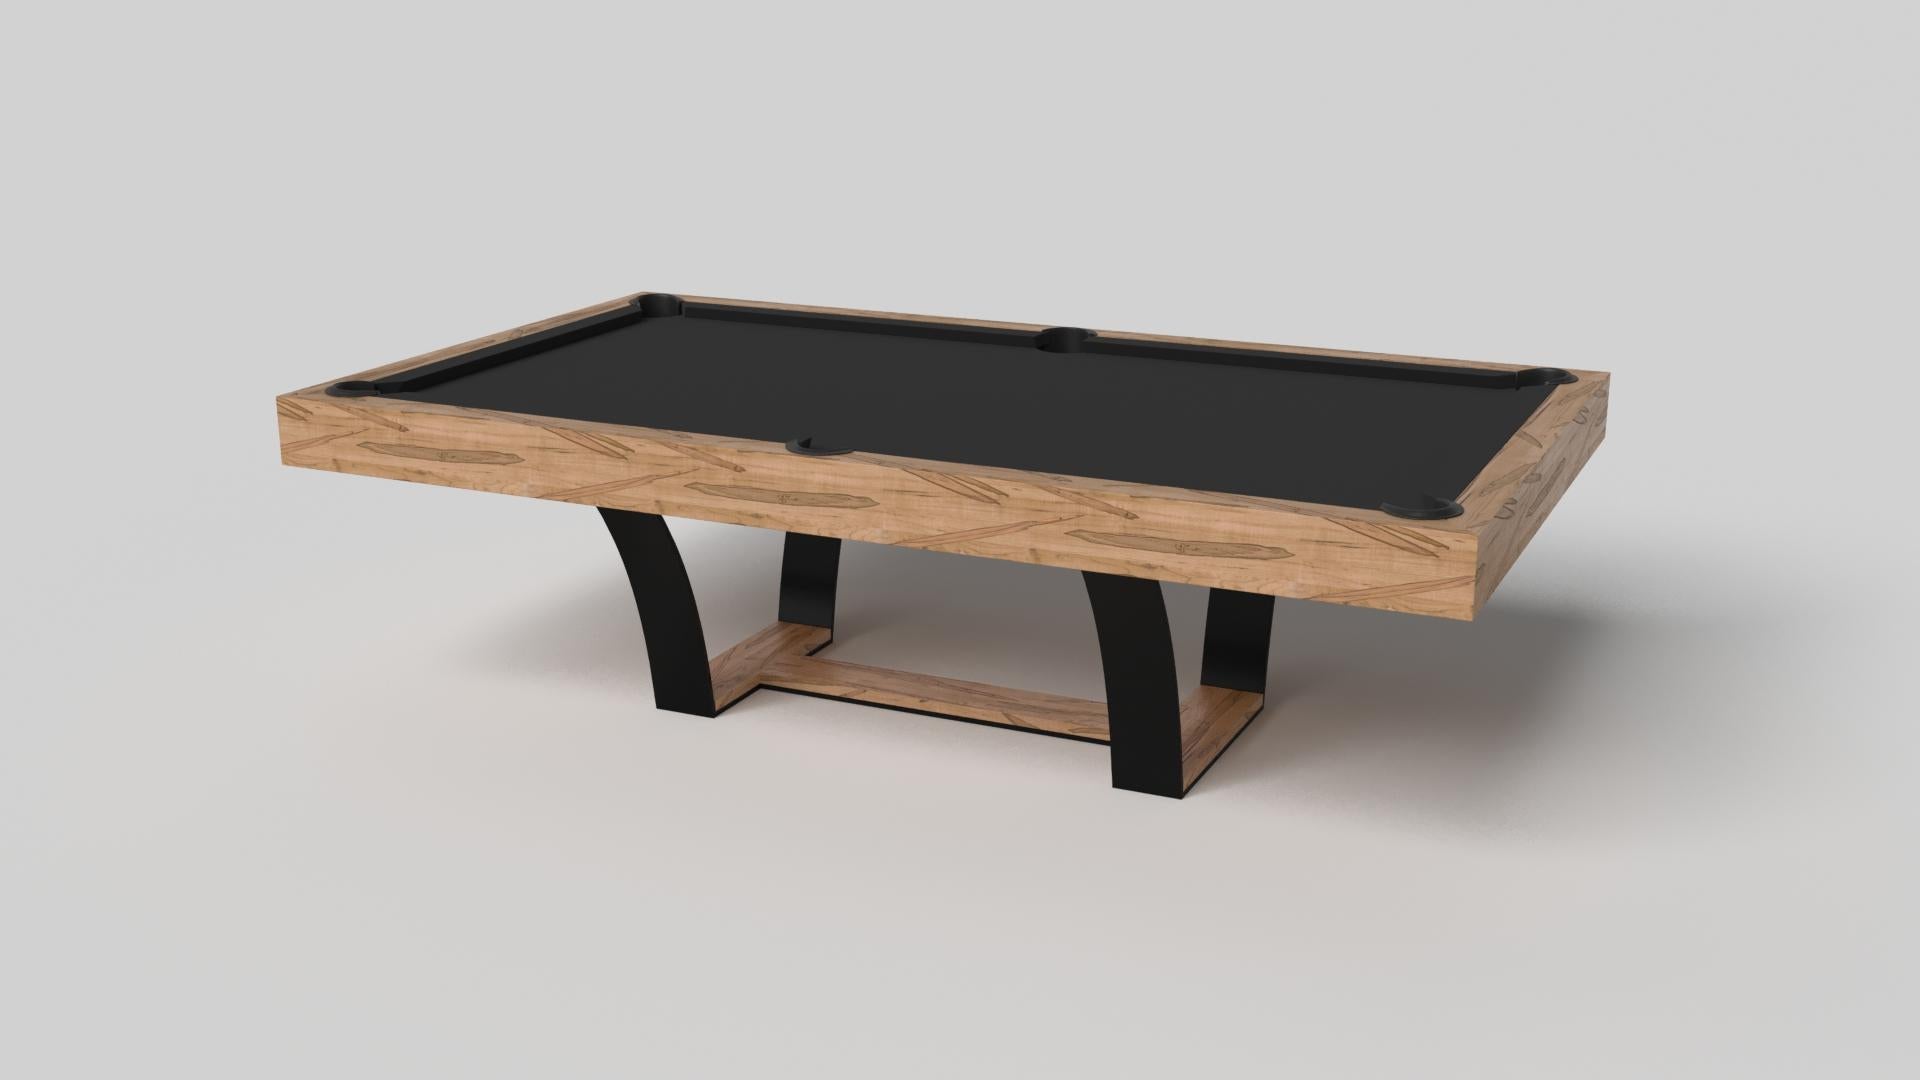 With an I-shaped metal base, slightly sloped metal legs, and a contrasting wood top, the Elite pool table exudes modern sophistication while evoking a sense of art deco design. This table is a confluence of style, made to meet today's demands and